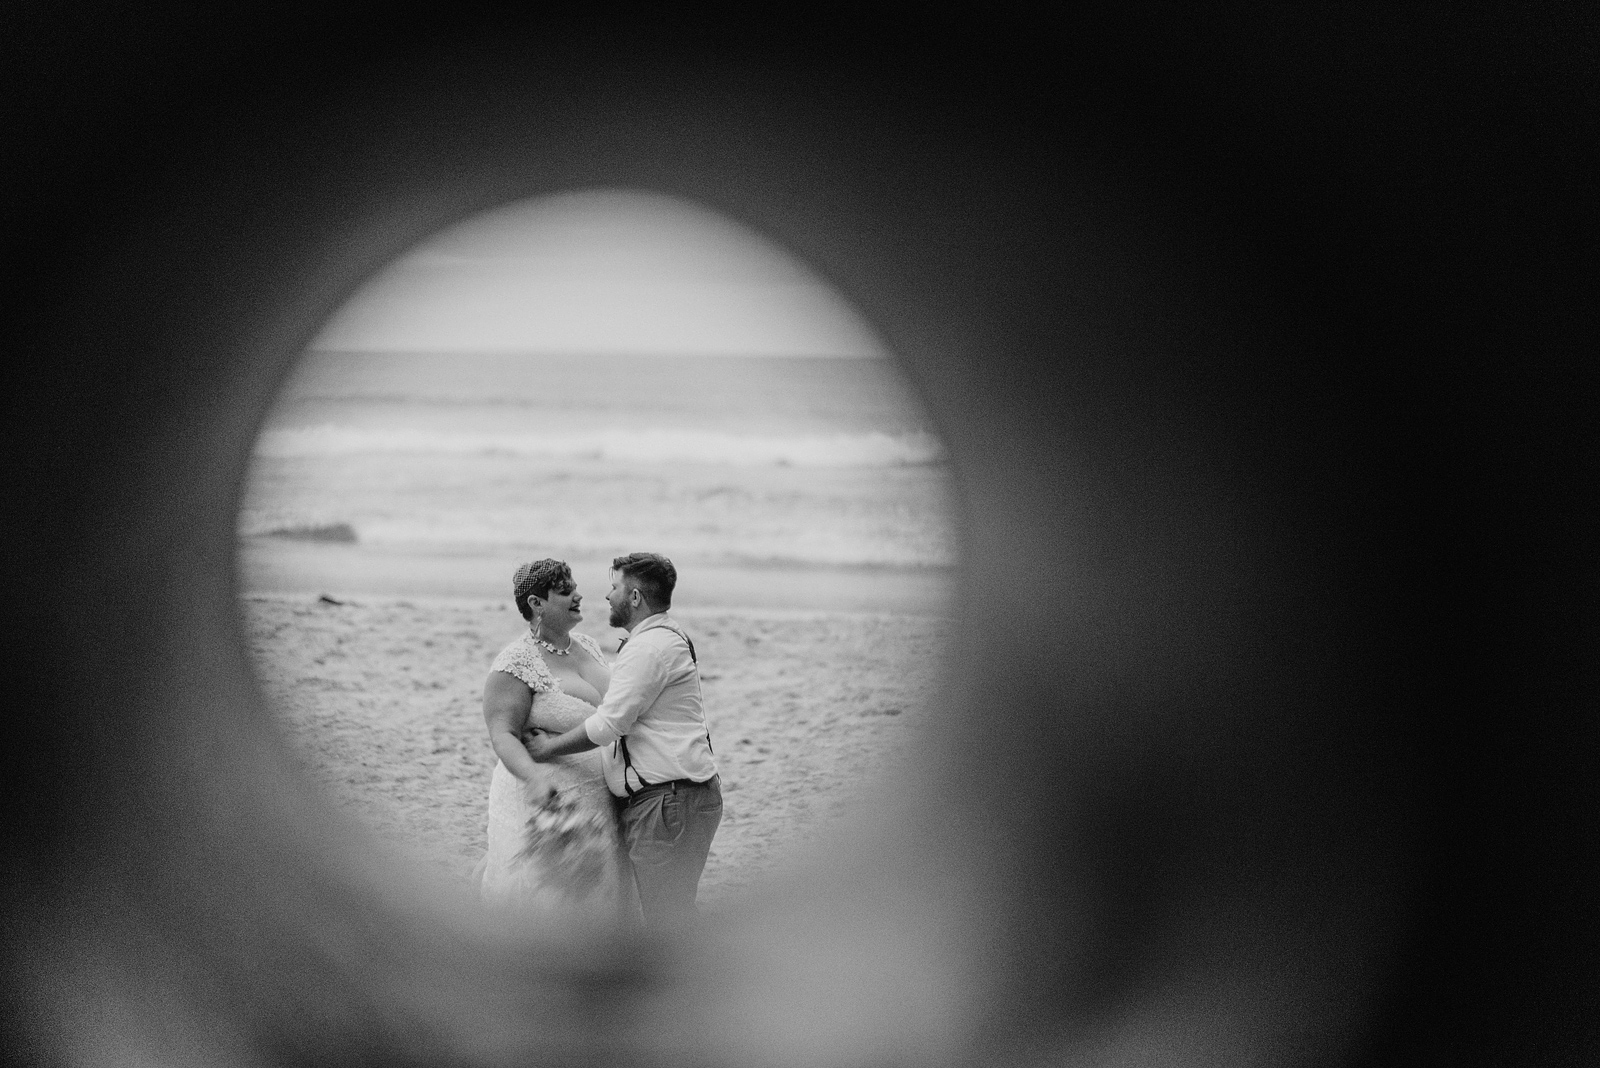 Creative black and white portrait of bride and groom taken through a hole in the wall - Oceanside Community Club Wedding” title=